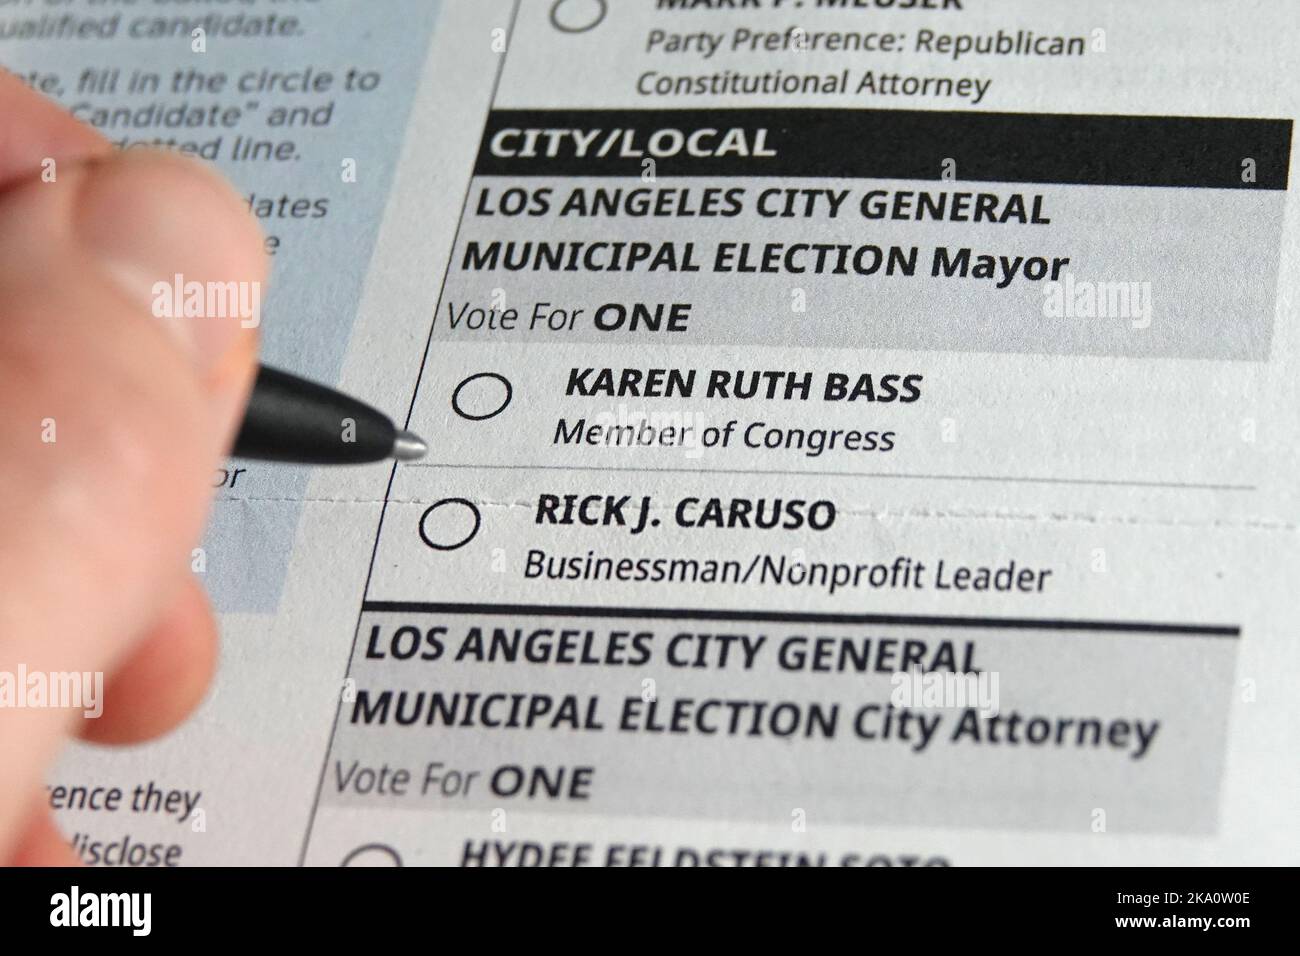 Los Angeles, California / USA - Oct. 30, 2022: A pen is shown about to select a bubble on a mail-in voting ballot for either Karen Bass or Rick Caruso. Stock Photo